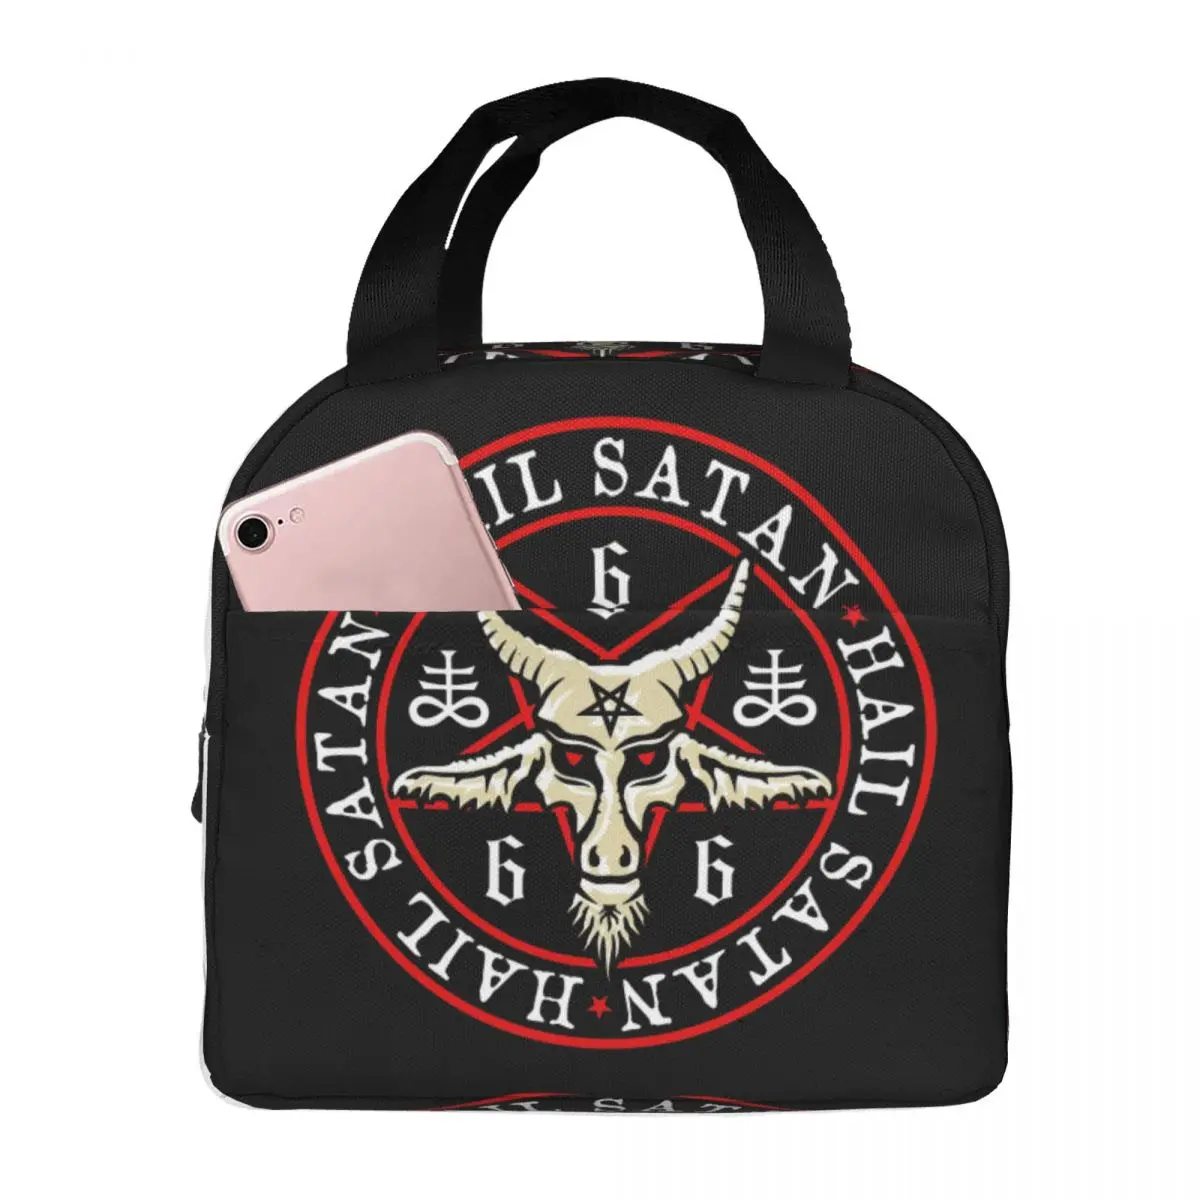 

Hail Satan Baphomet In Occult Inverted Pentagram Lunch Bag Portable Insulated Cooler Thermal Food Picnic Lunch Box for Women